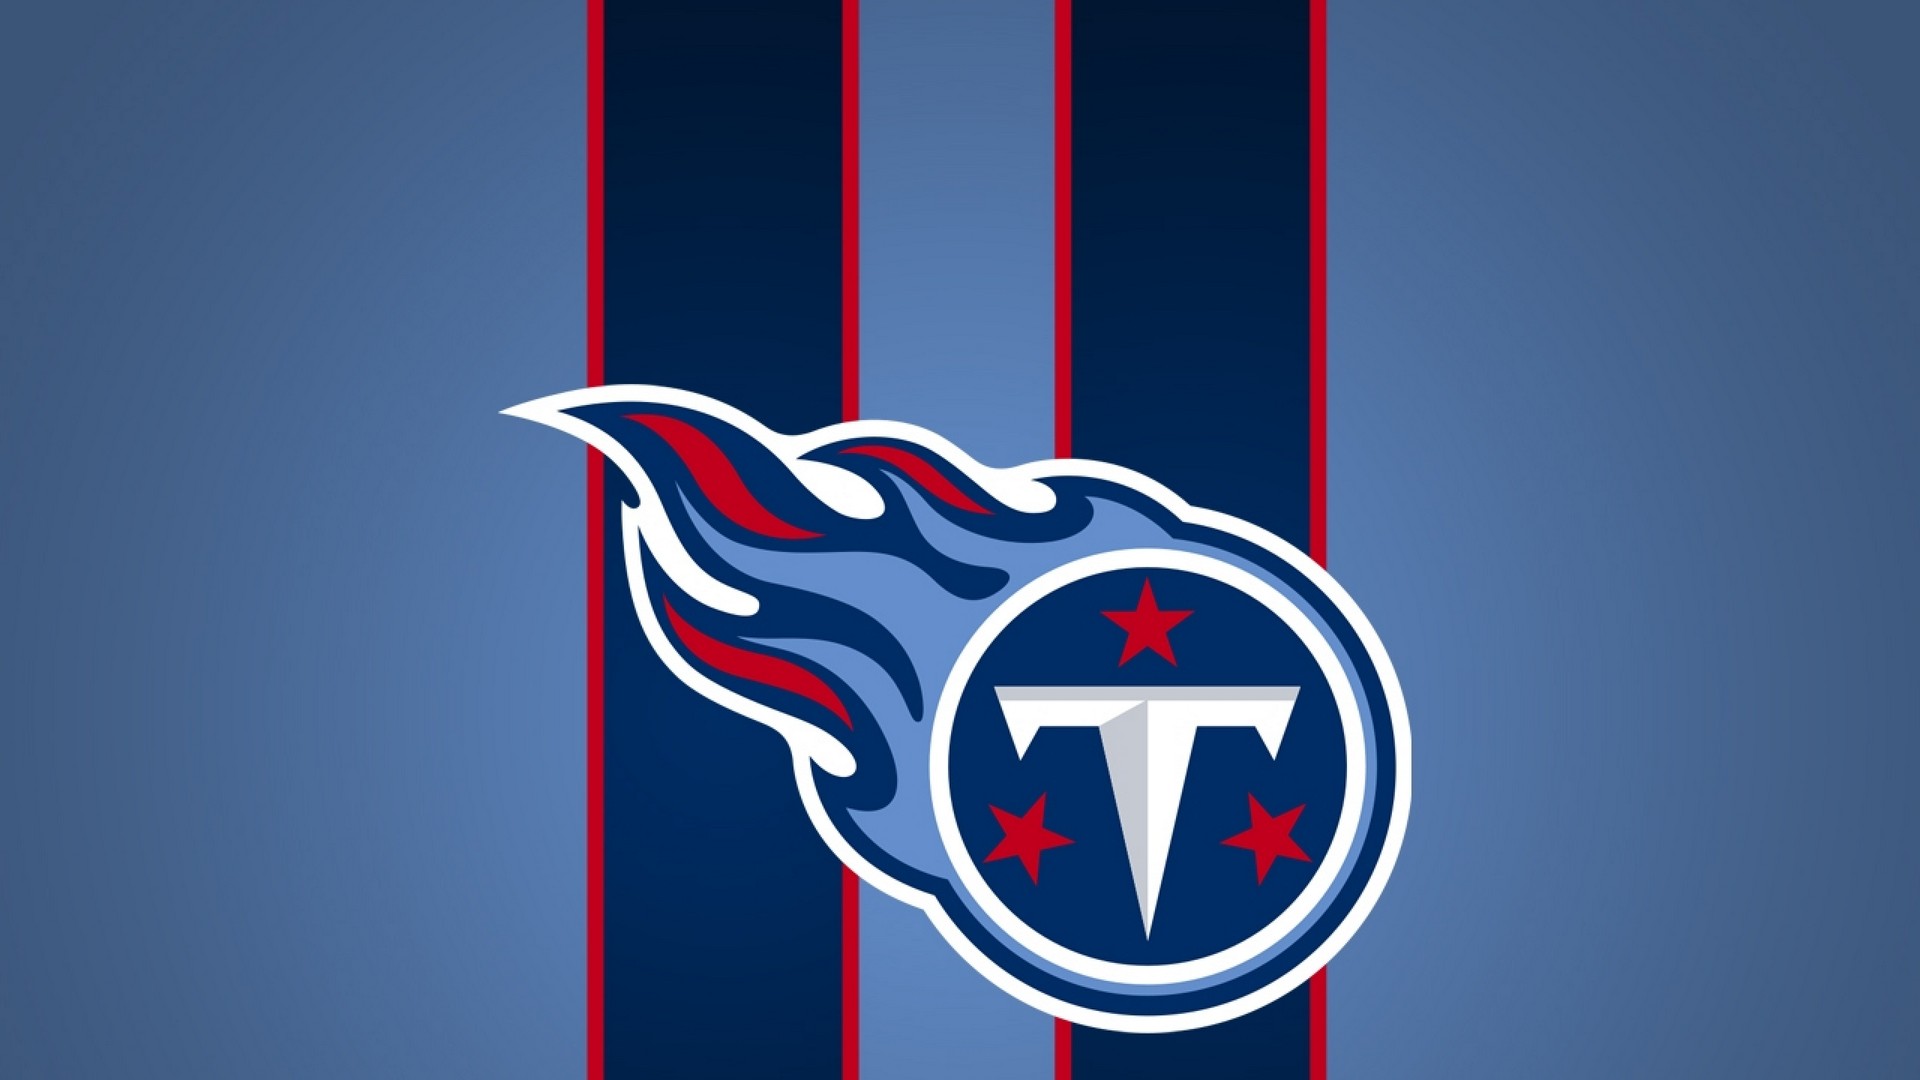 Tennessee Titans Wallpaper For Mac Backgrounds with high-resolution 1920x1080 pixel. You can use this wallpaper for your Mac or Windows Desktop Background, iPhone, Android or Tablet and another Smartphone device